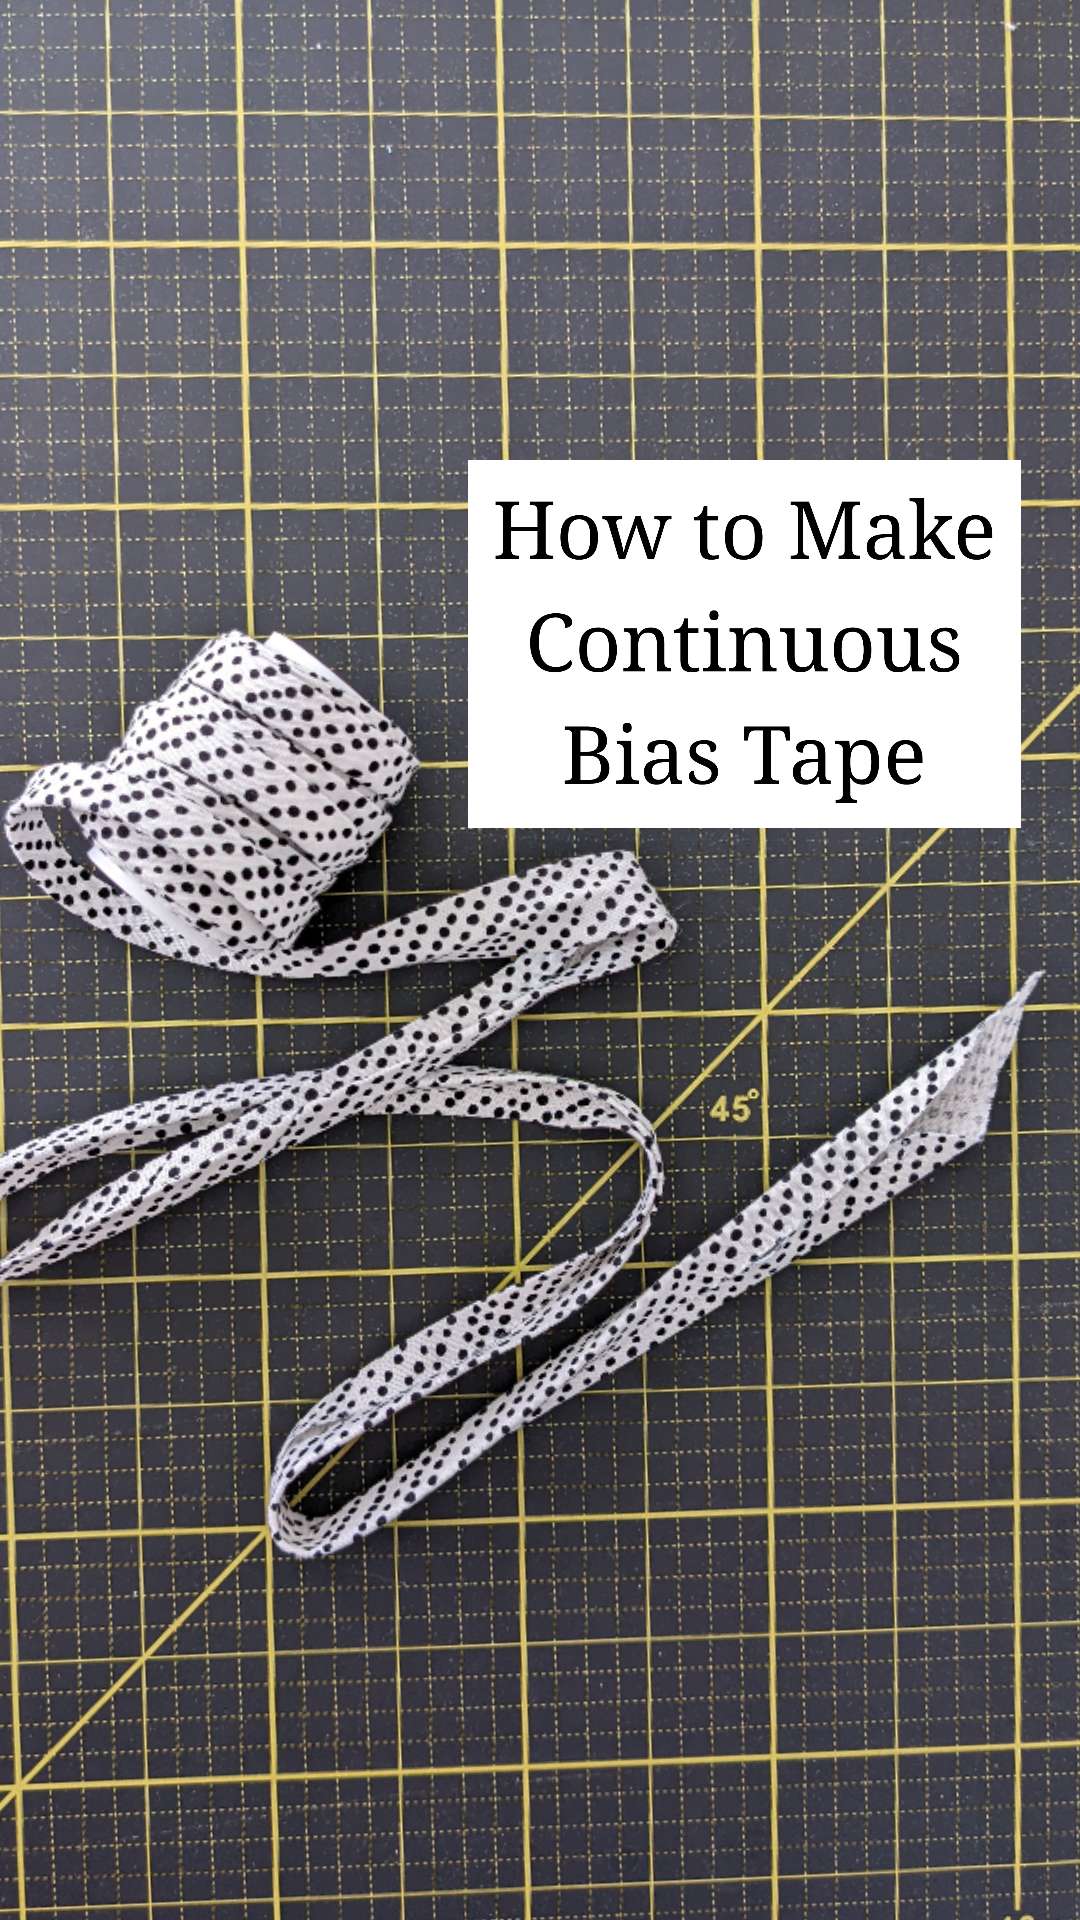 How to Make Continuous Bias Tape - Fast Method